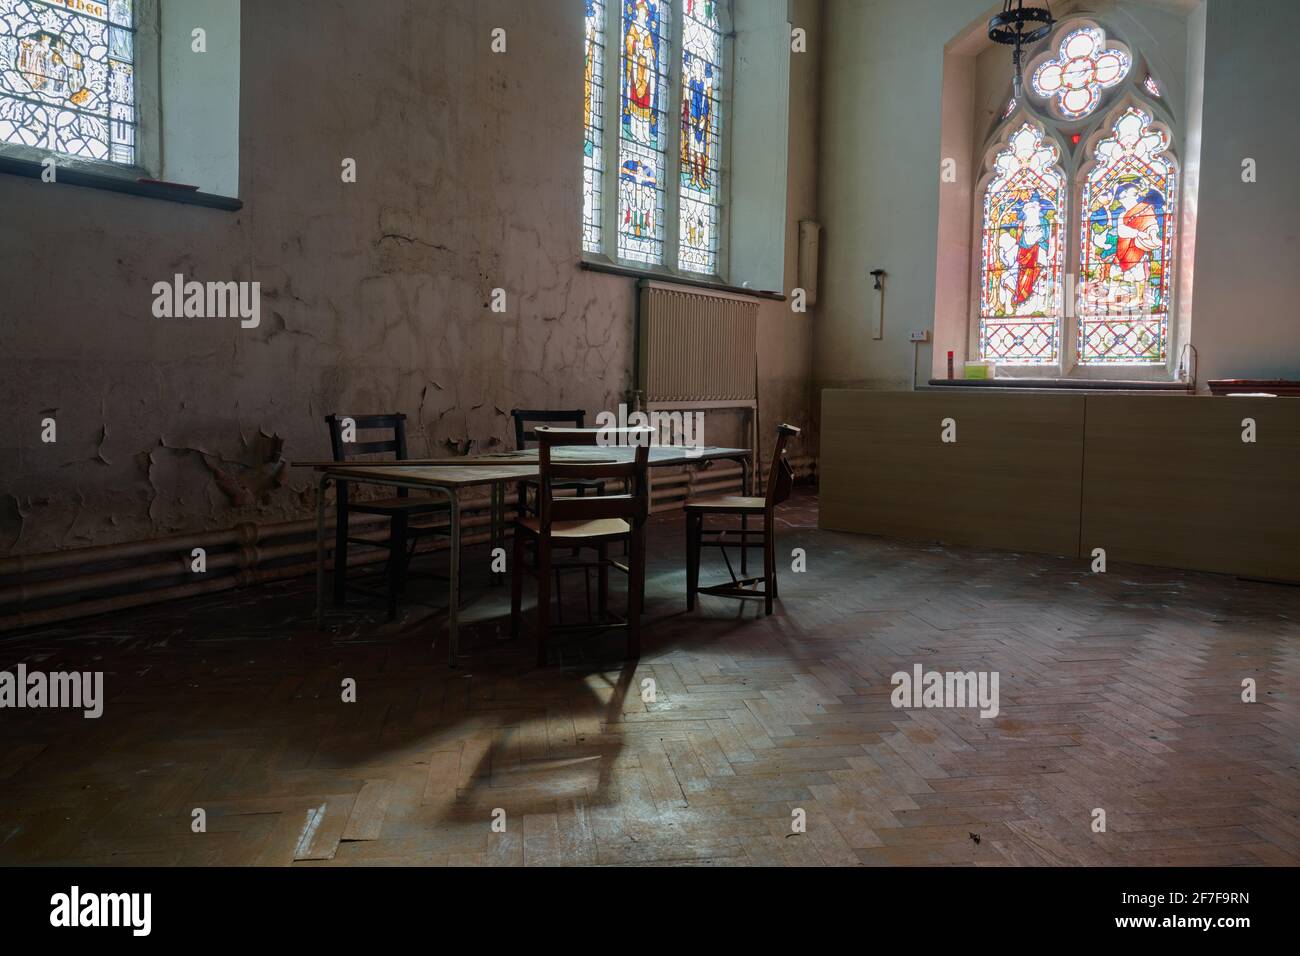 Abandoned church, many people have passed through this place and now it sits in eerie silence. Stock Photo